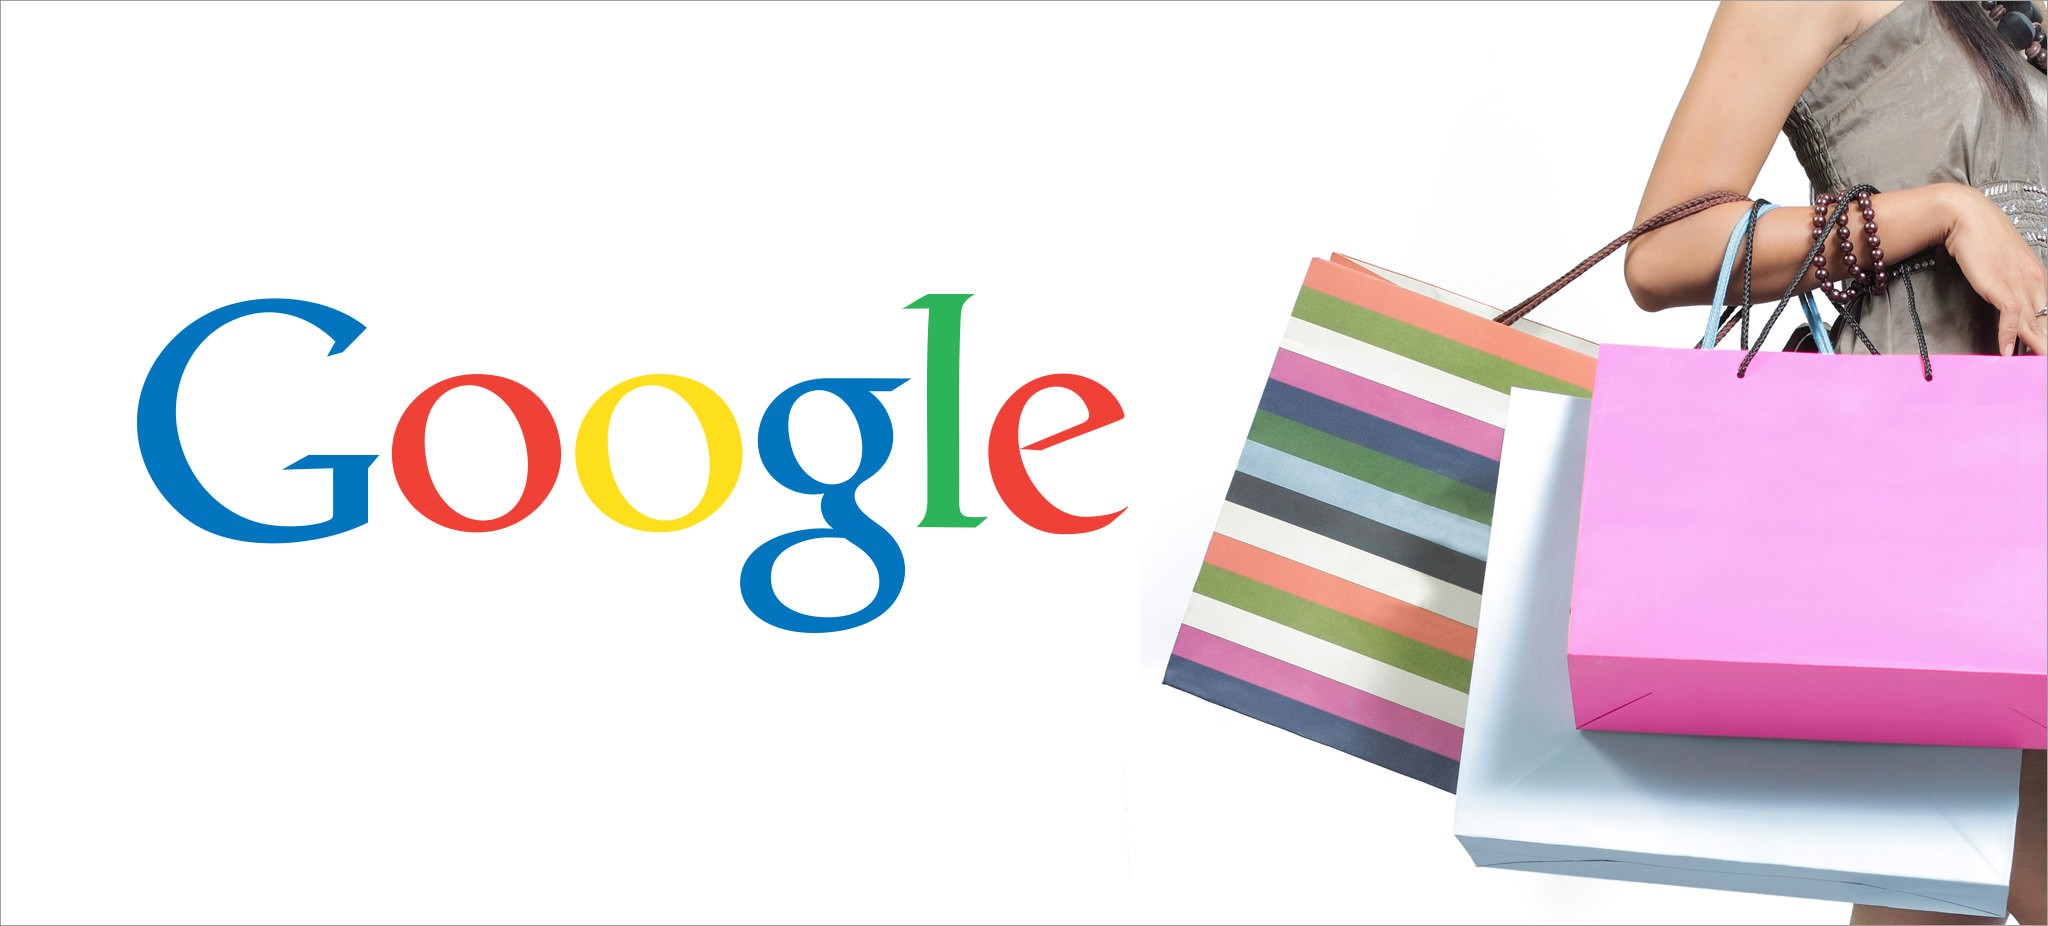 Google is all set to add buy buttons directly to its search results